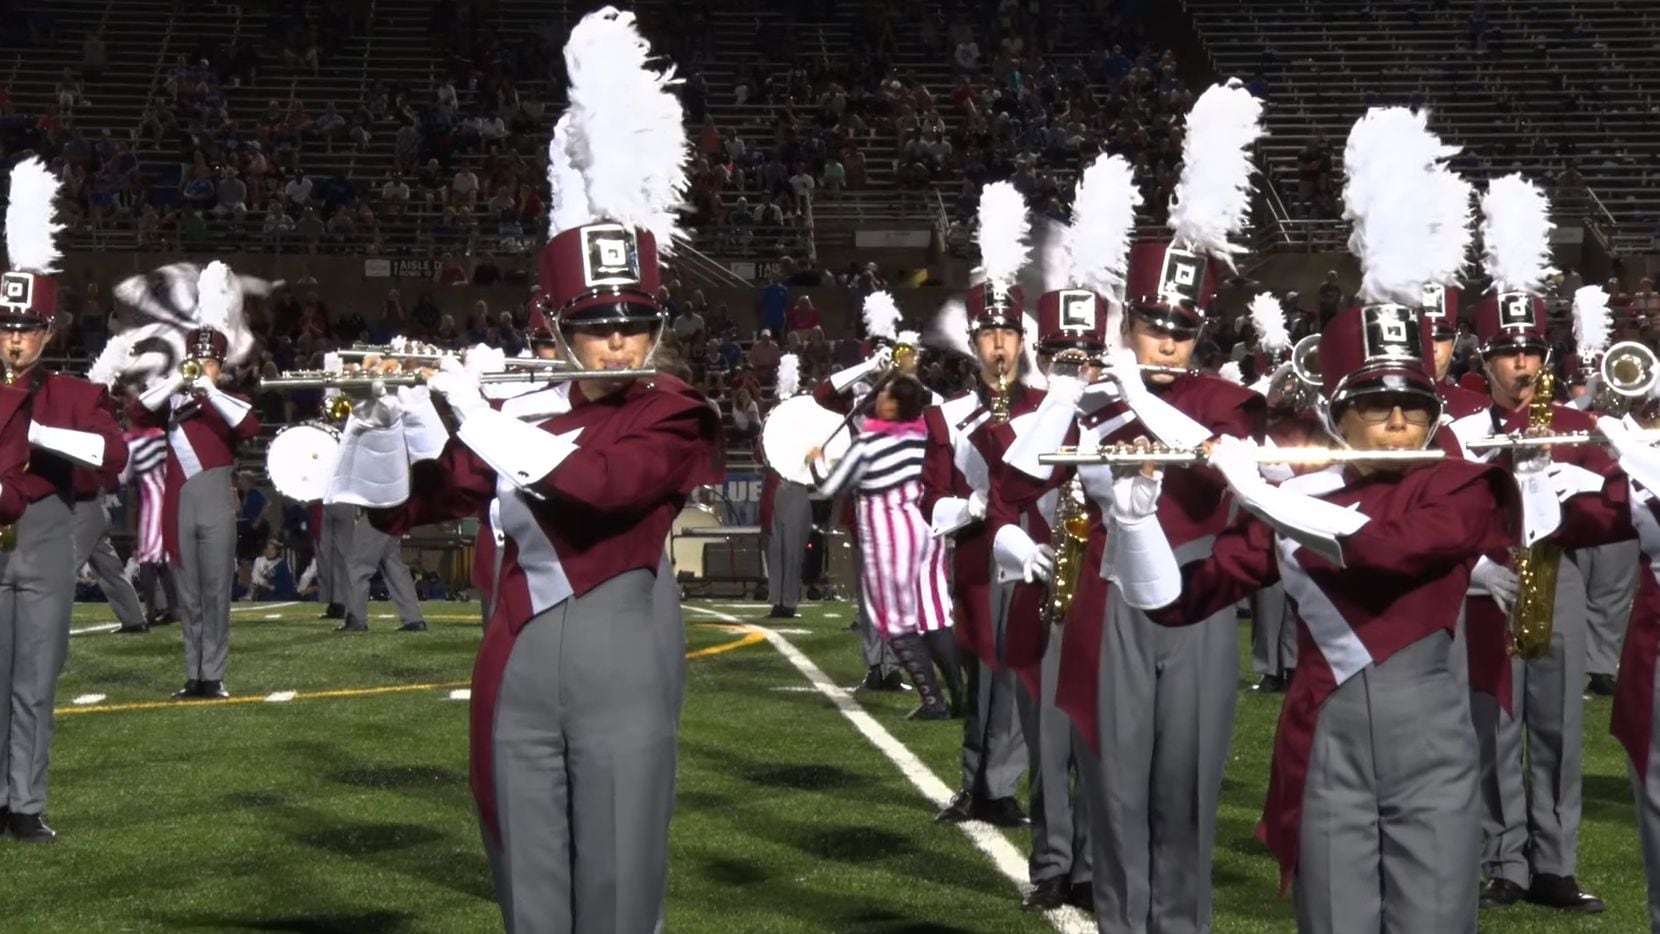 Members of the Plano Senior High School marching band are shown here in a screenshot of a...